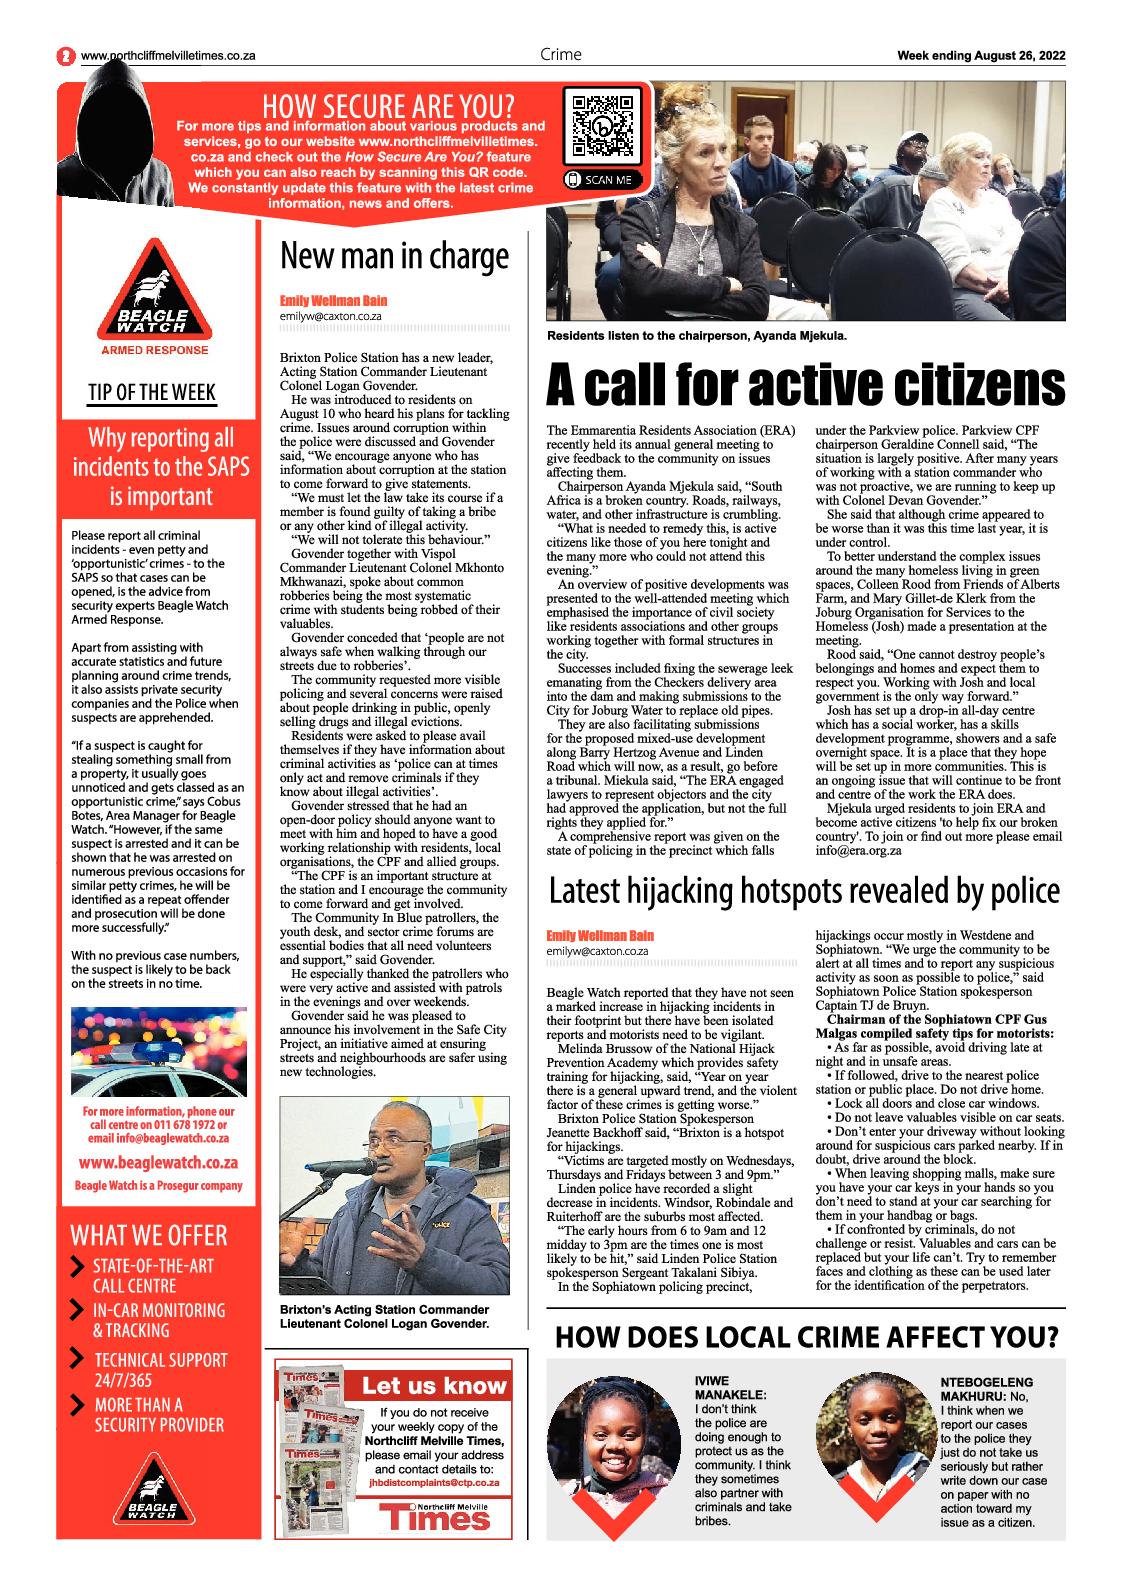 Northcliff Melville Times August 26 2022 page 2